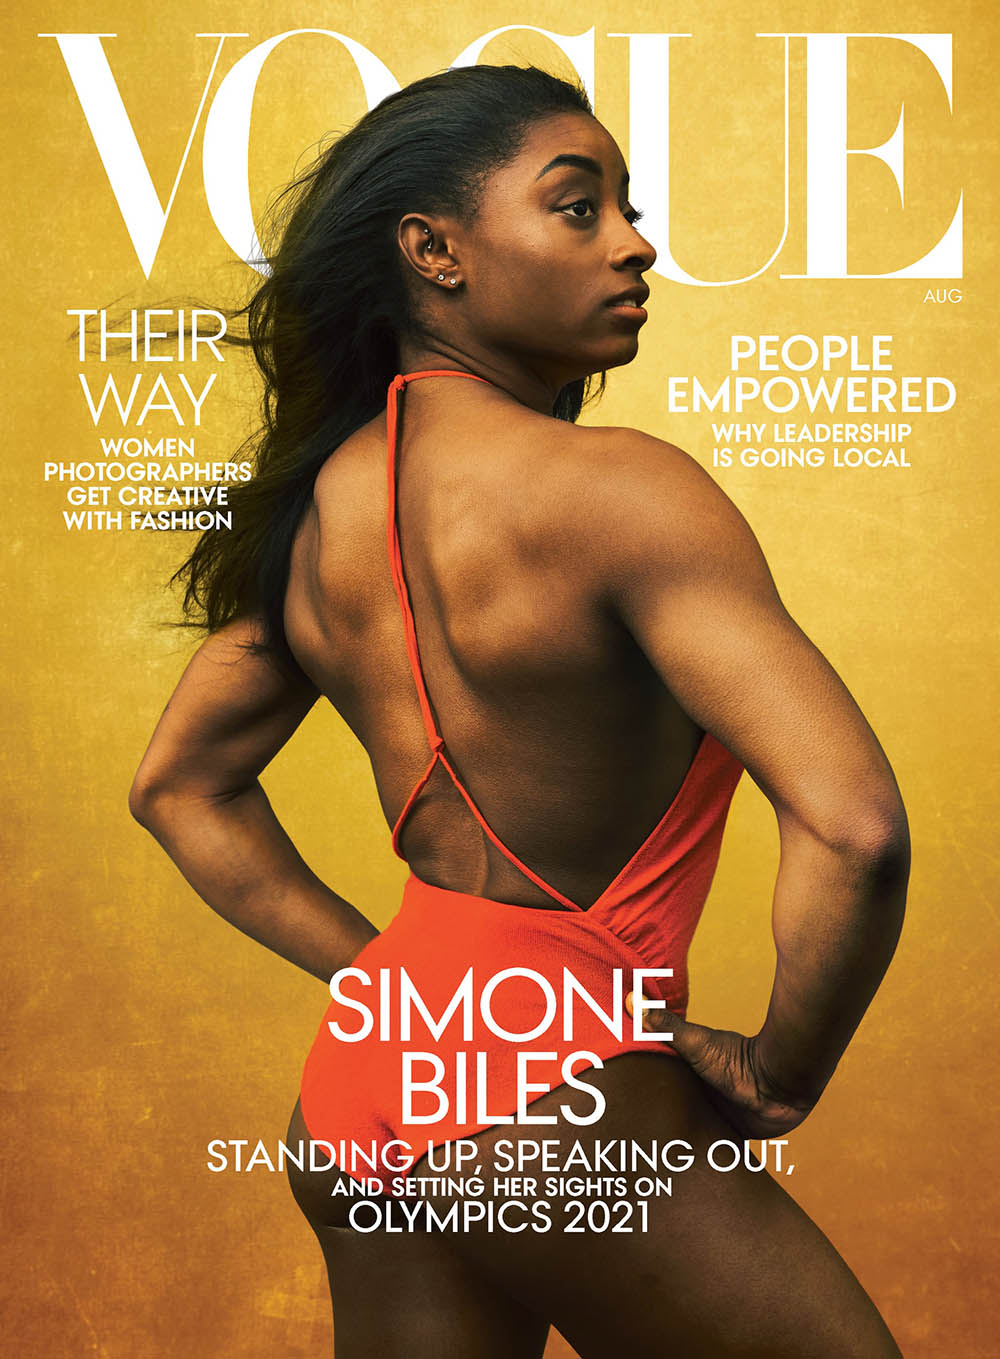 Simone Biles covers Vogue US August 2020 by Annie Leibovitz